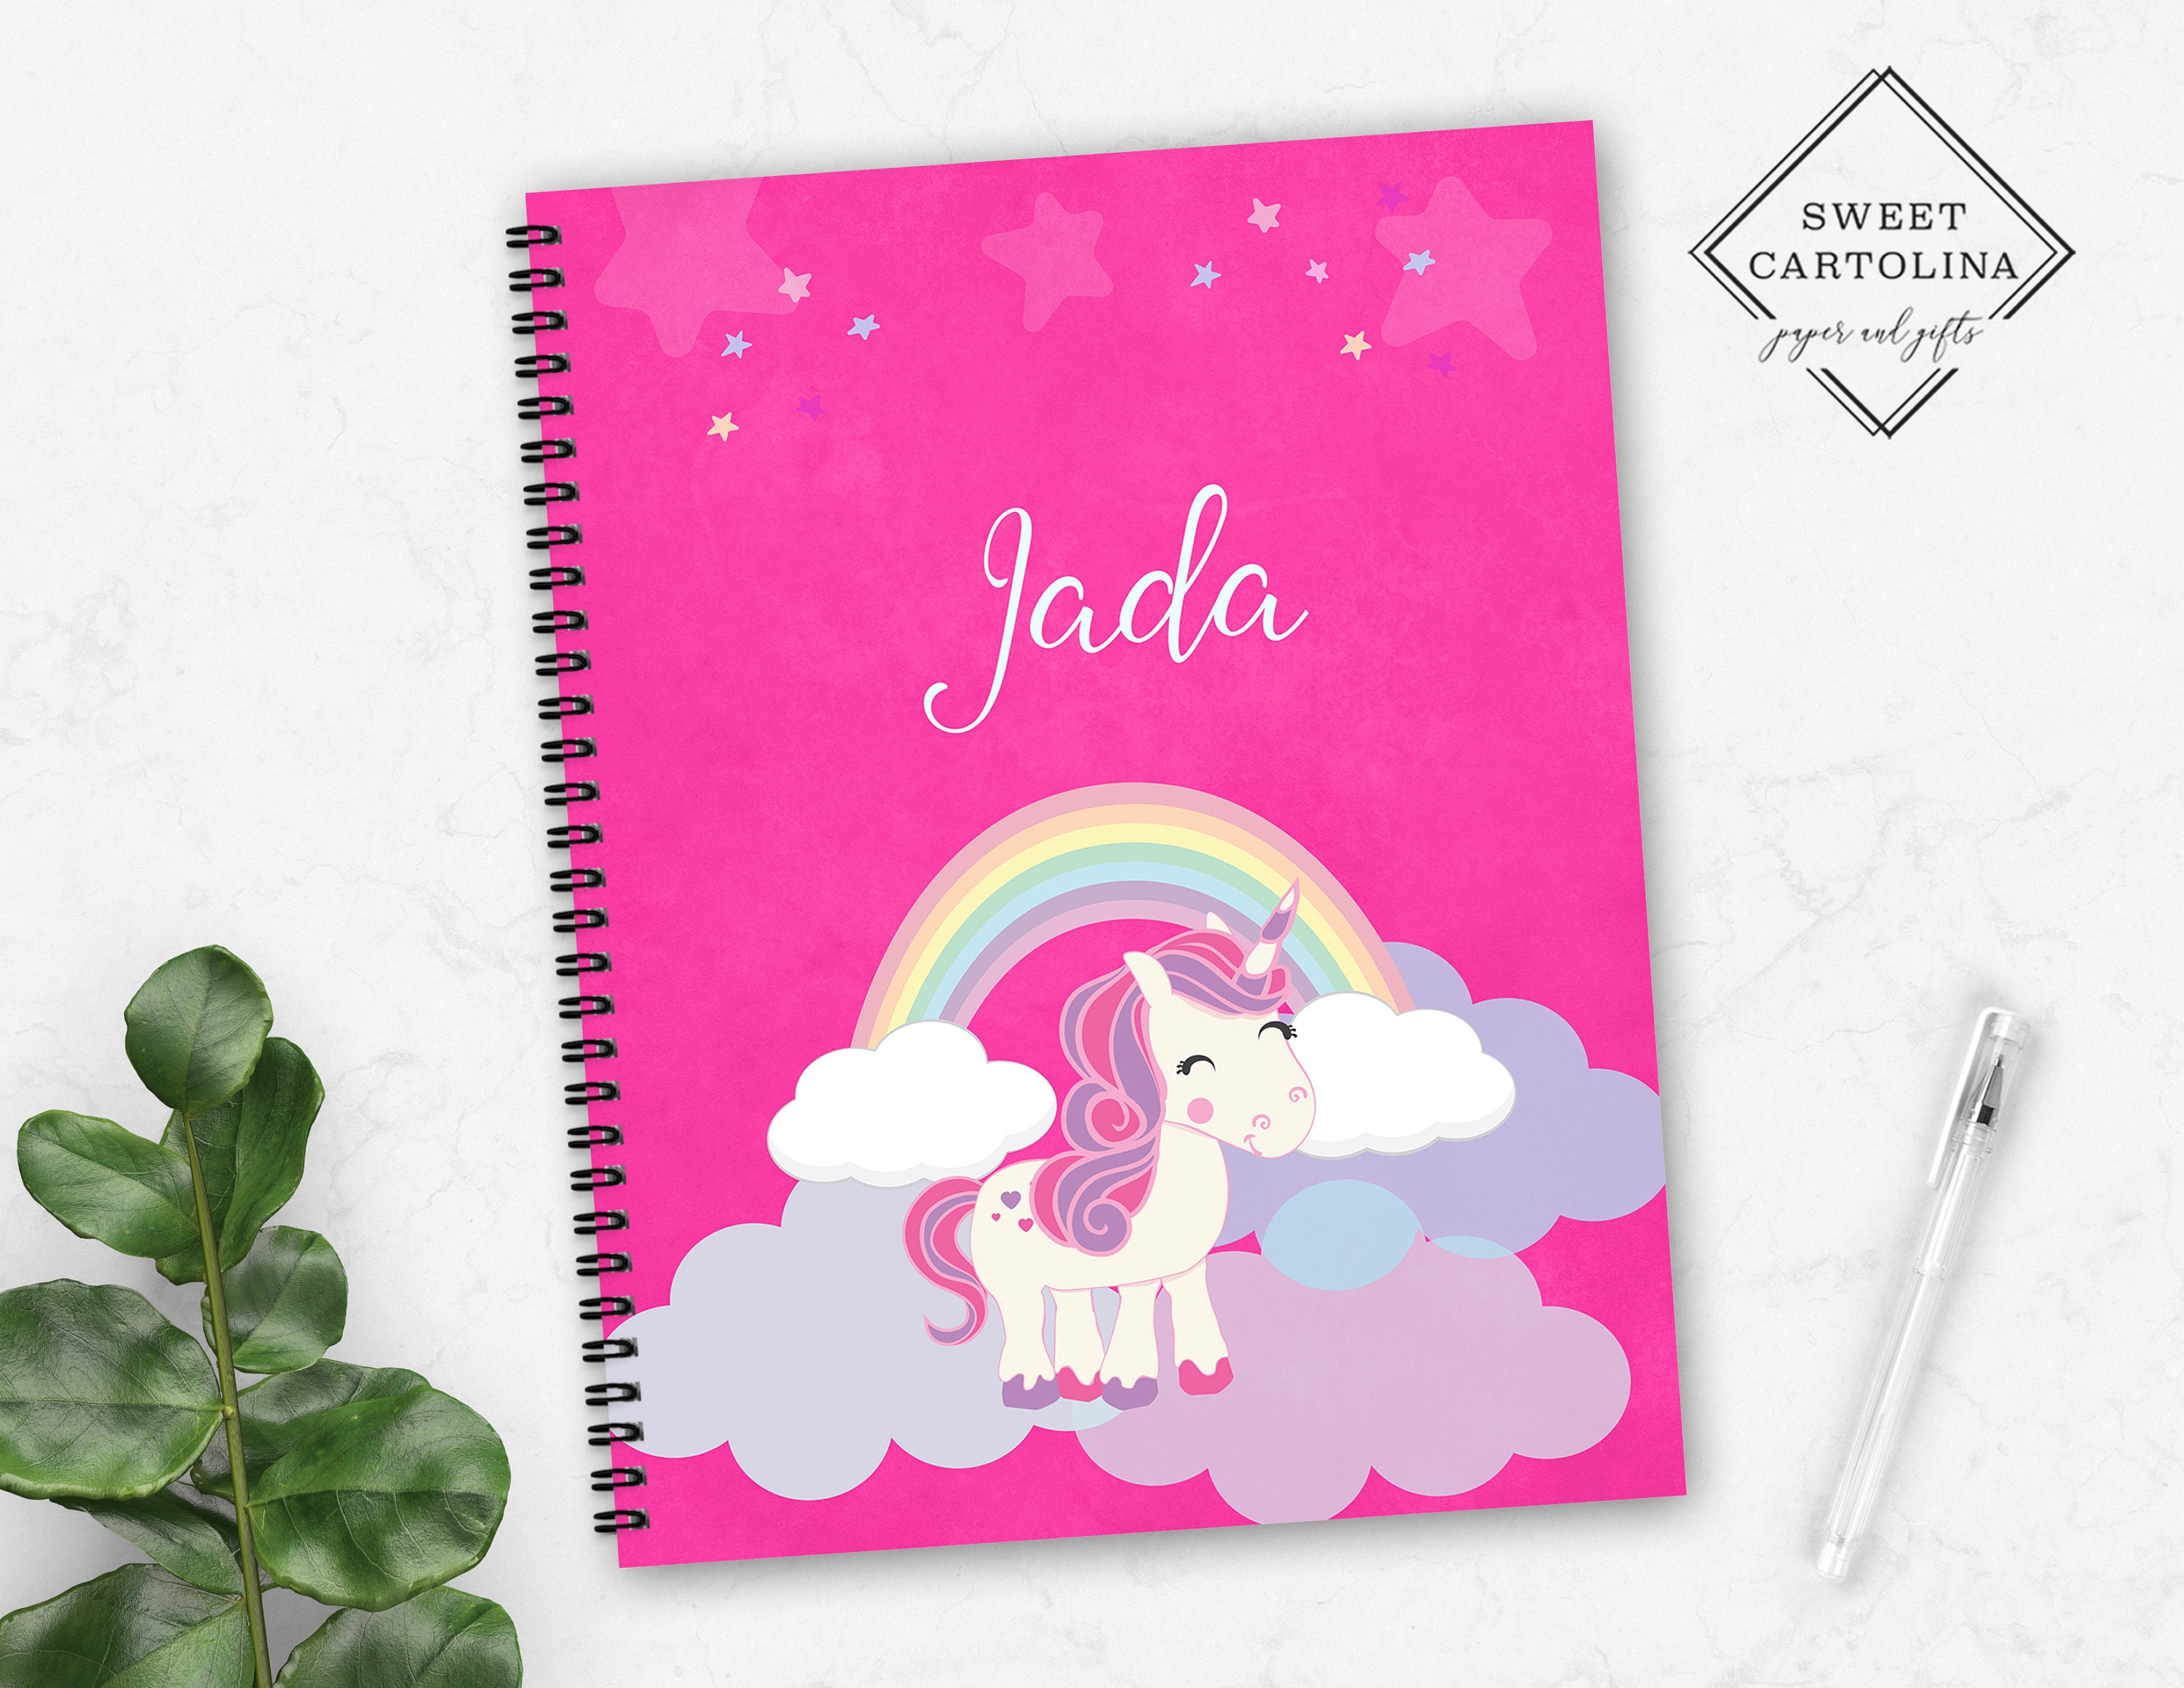 Sketchbook for Kids : Unicorn Pretty Unicorn Large Sketch Book for Sketching,  Drawing, Creative Doodling Notepad and Activity Book - Birthday and  Christmas Gift Ideas for Kids, Boys, Girls, Teens and Women 